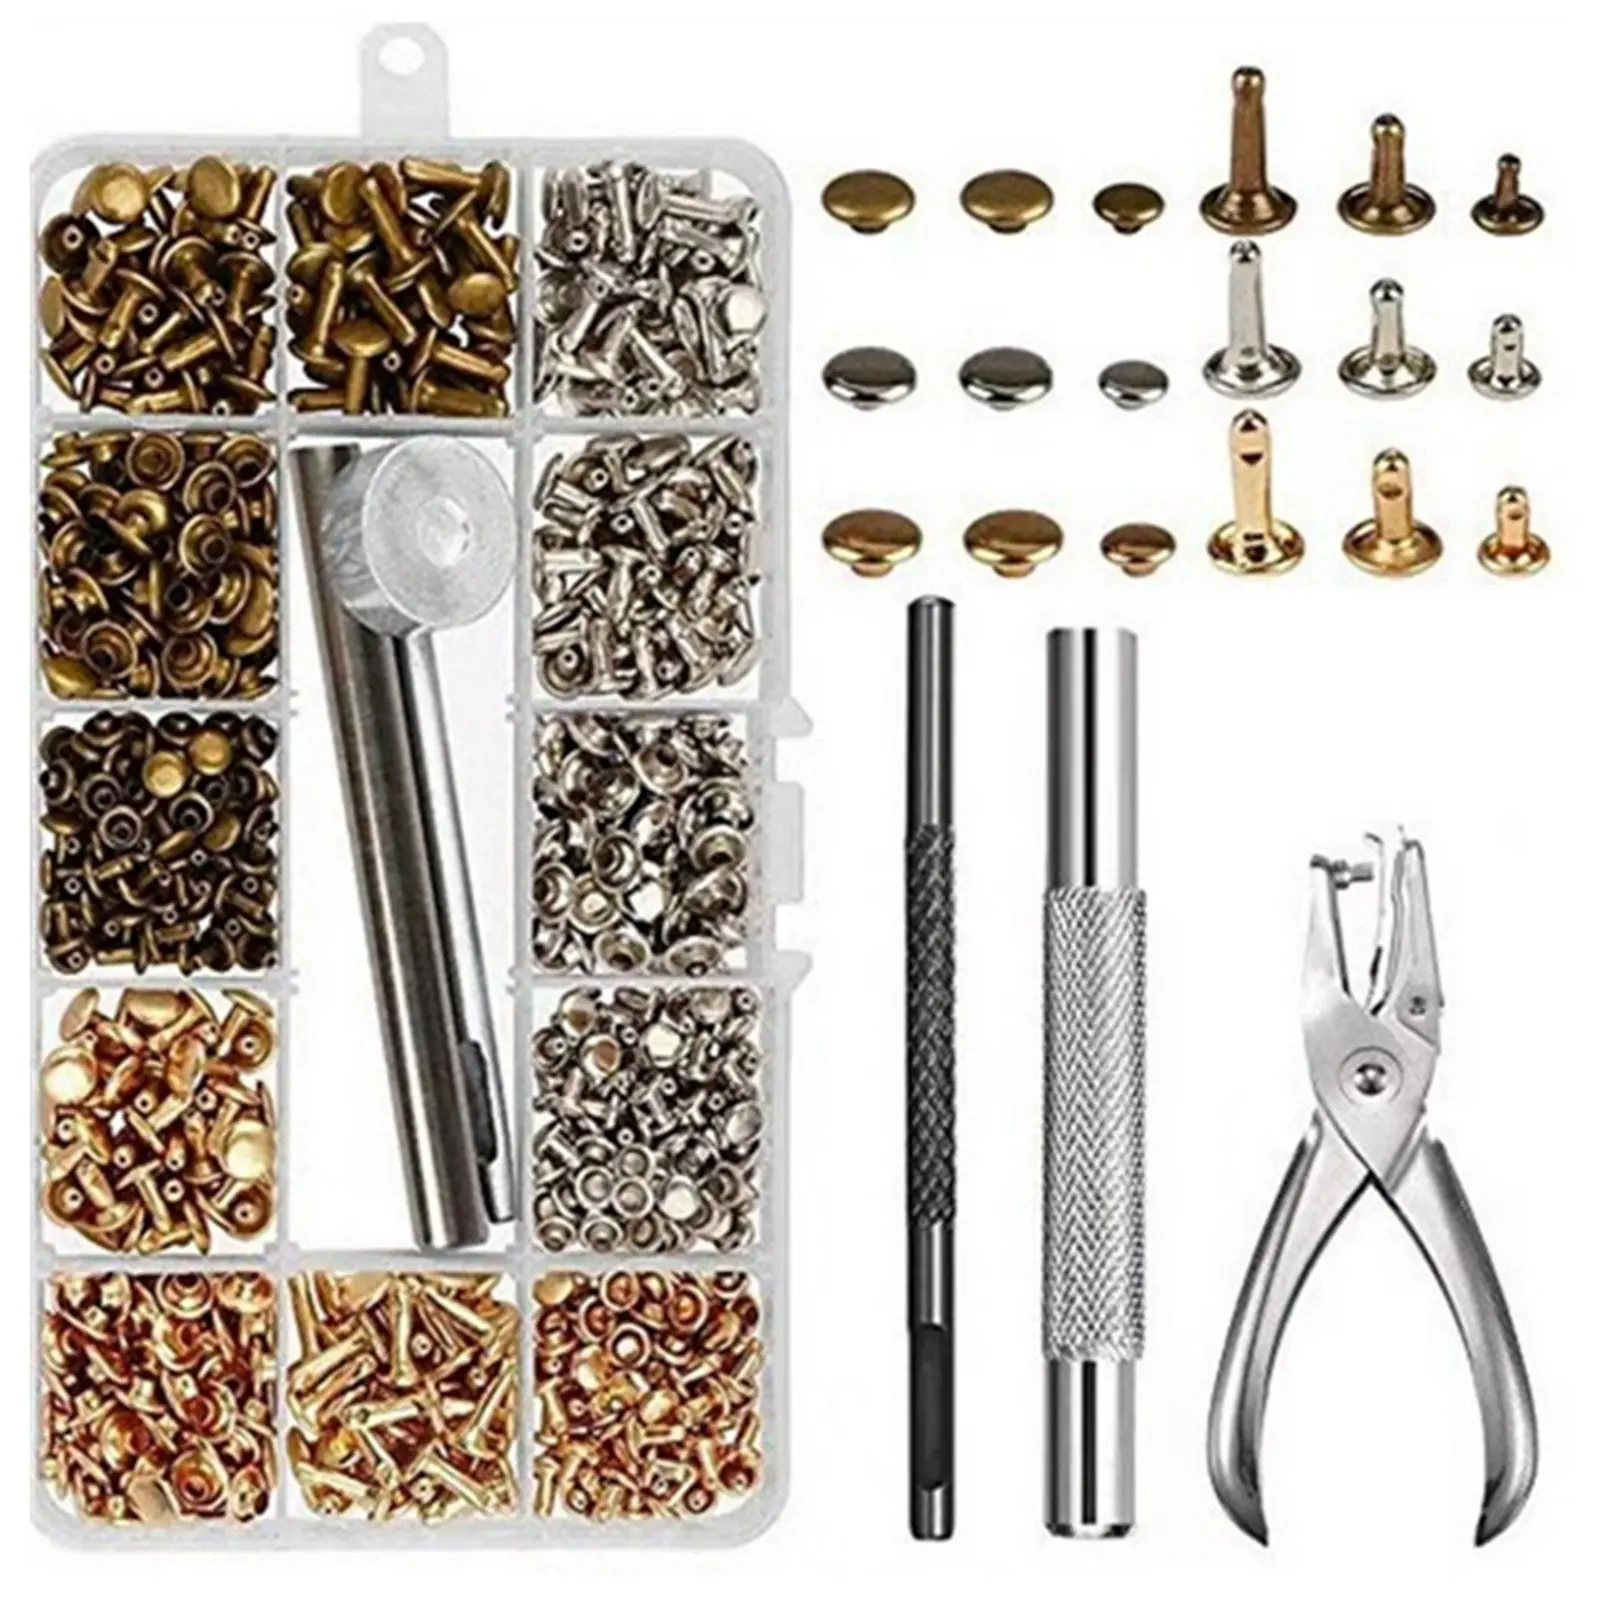 300 Sets Leather Rivets DIY Leather Craft Double Cap Rivet Tubular Metal Studs with Punch Pliers Fixing Set Tools